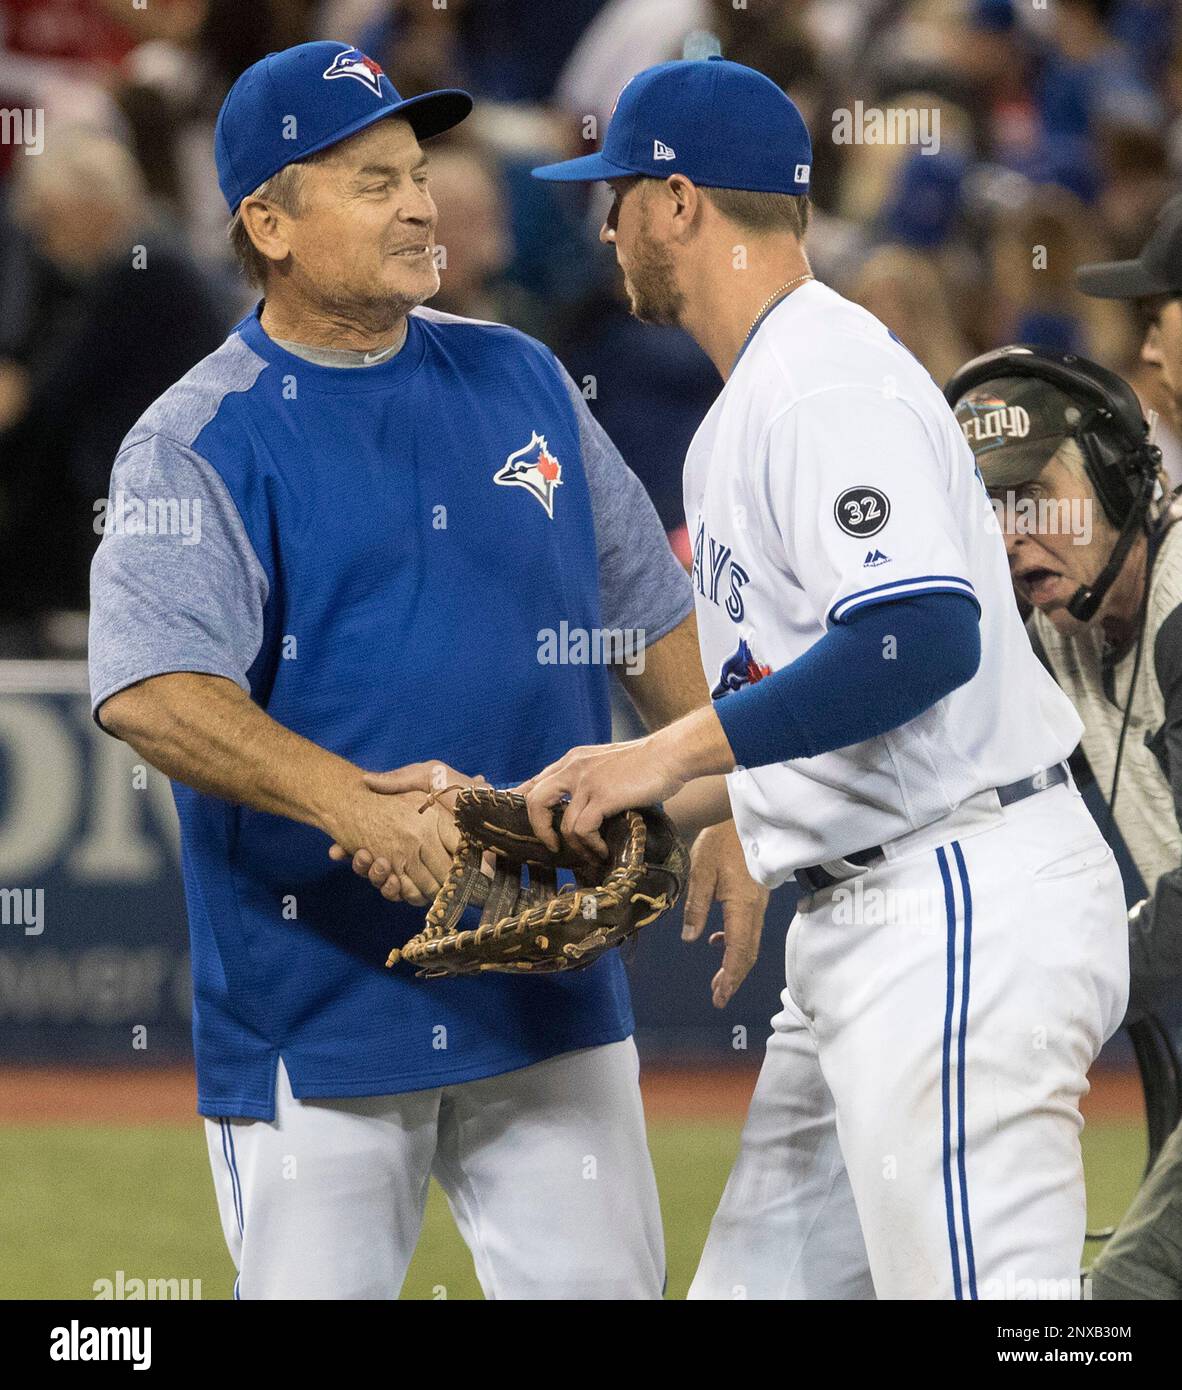 Toronto Blue Jays first baseman Justin Smoak, right, gets a handshake from  manager John Gibbons after they Blue Jays defeated the New York Yankees in  a baseball game in Toronto on Sunday